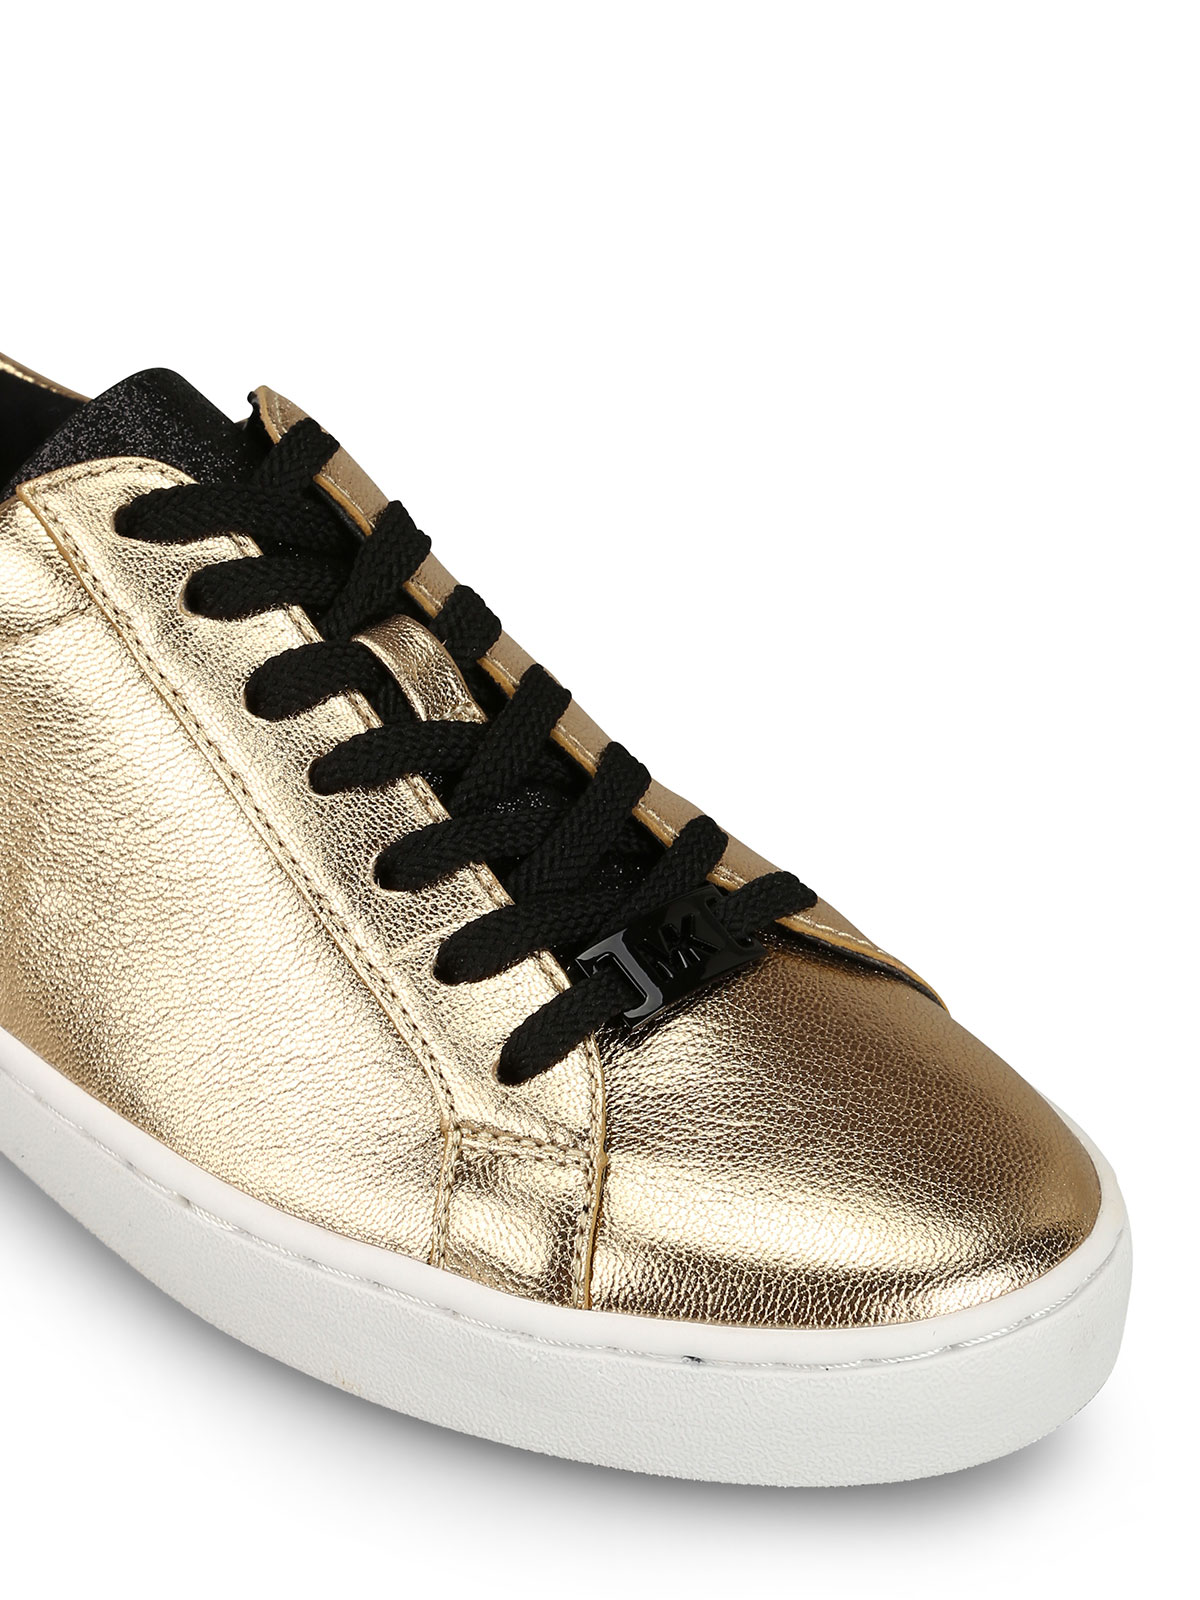 Trainers Michael Kors - Irving gold-tone leather lace-up sneakers 